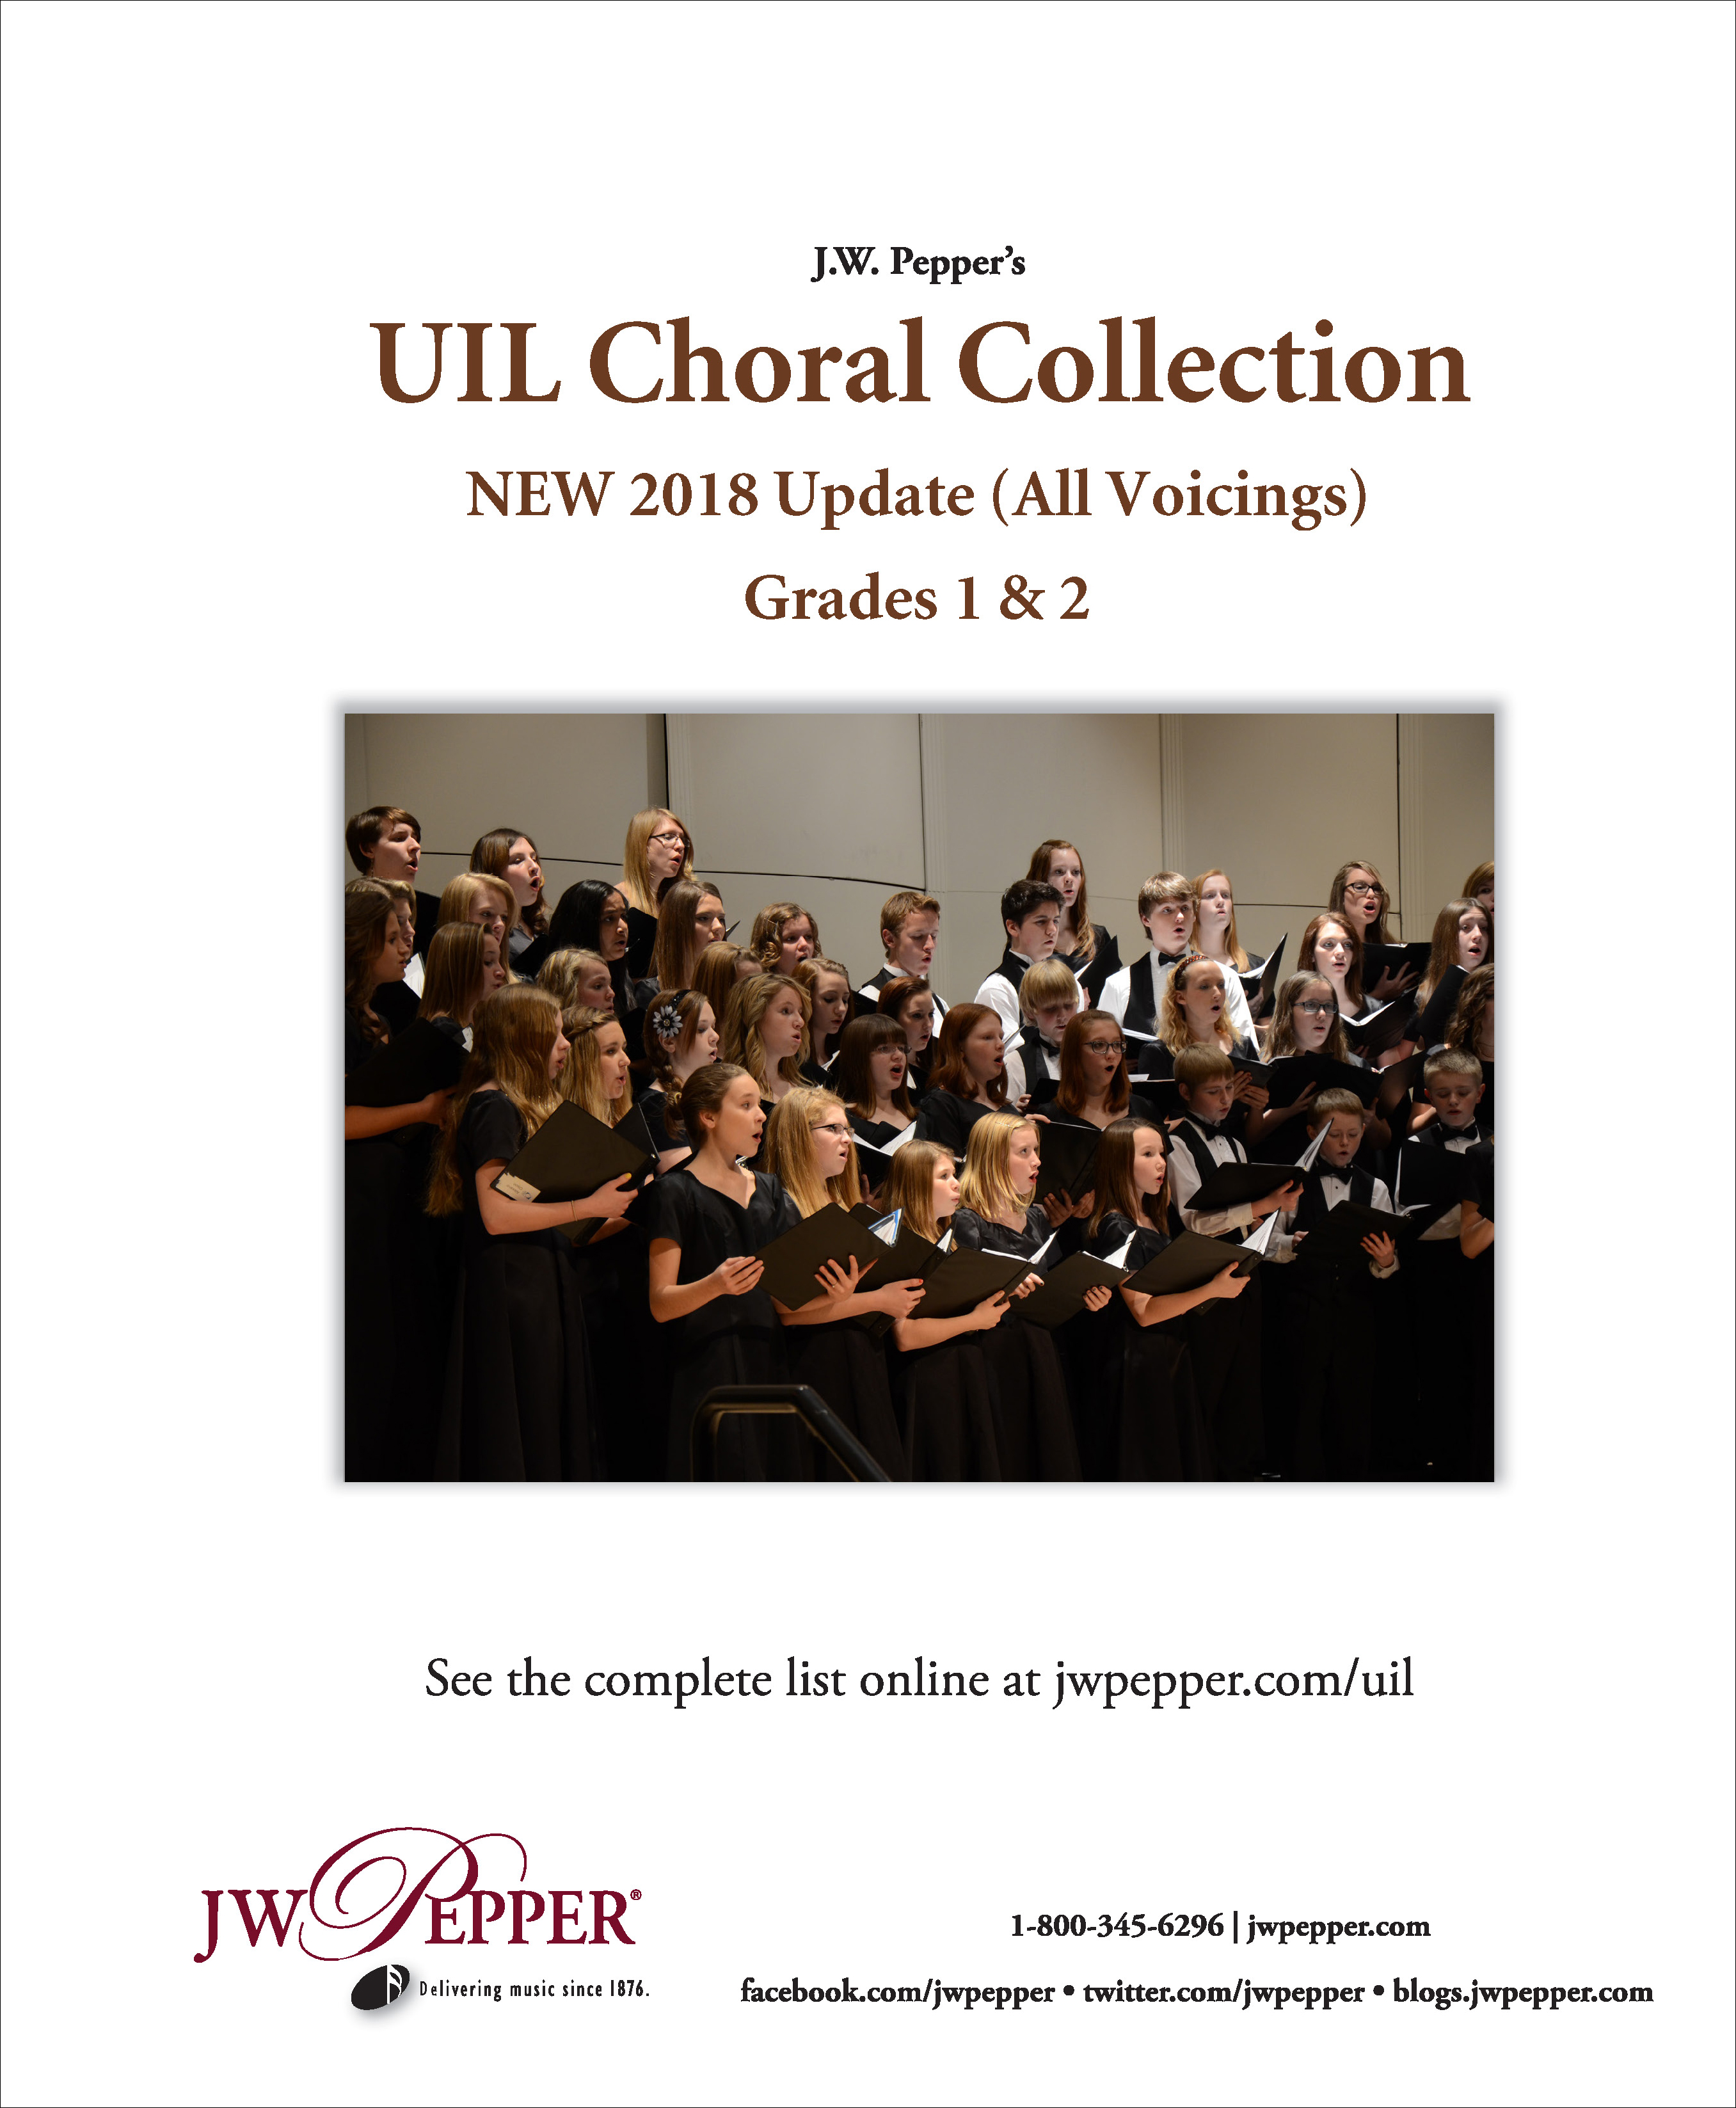 UIL Choral Collection 2018 Update - All Voicings/Grades